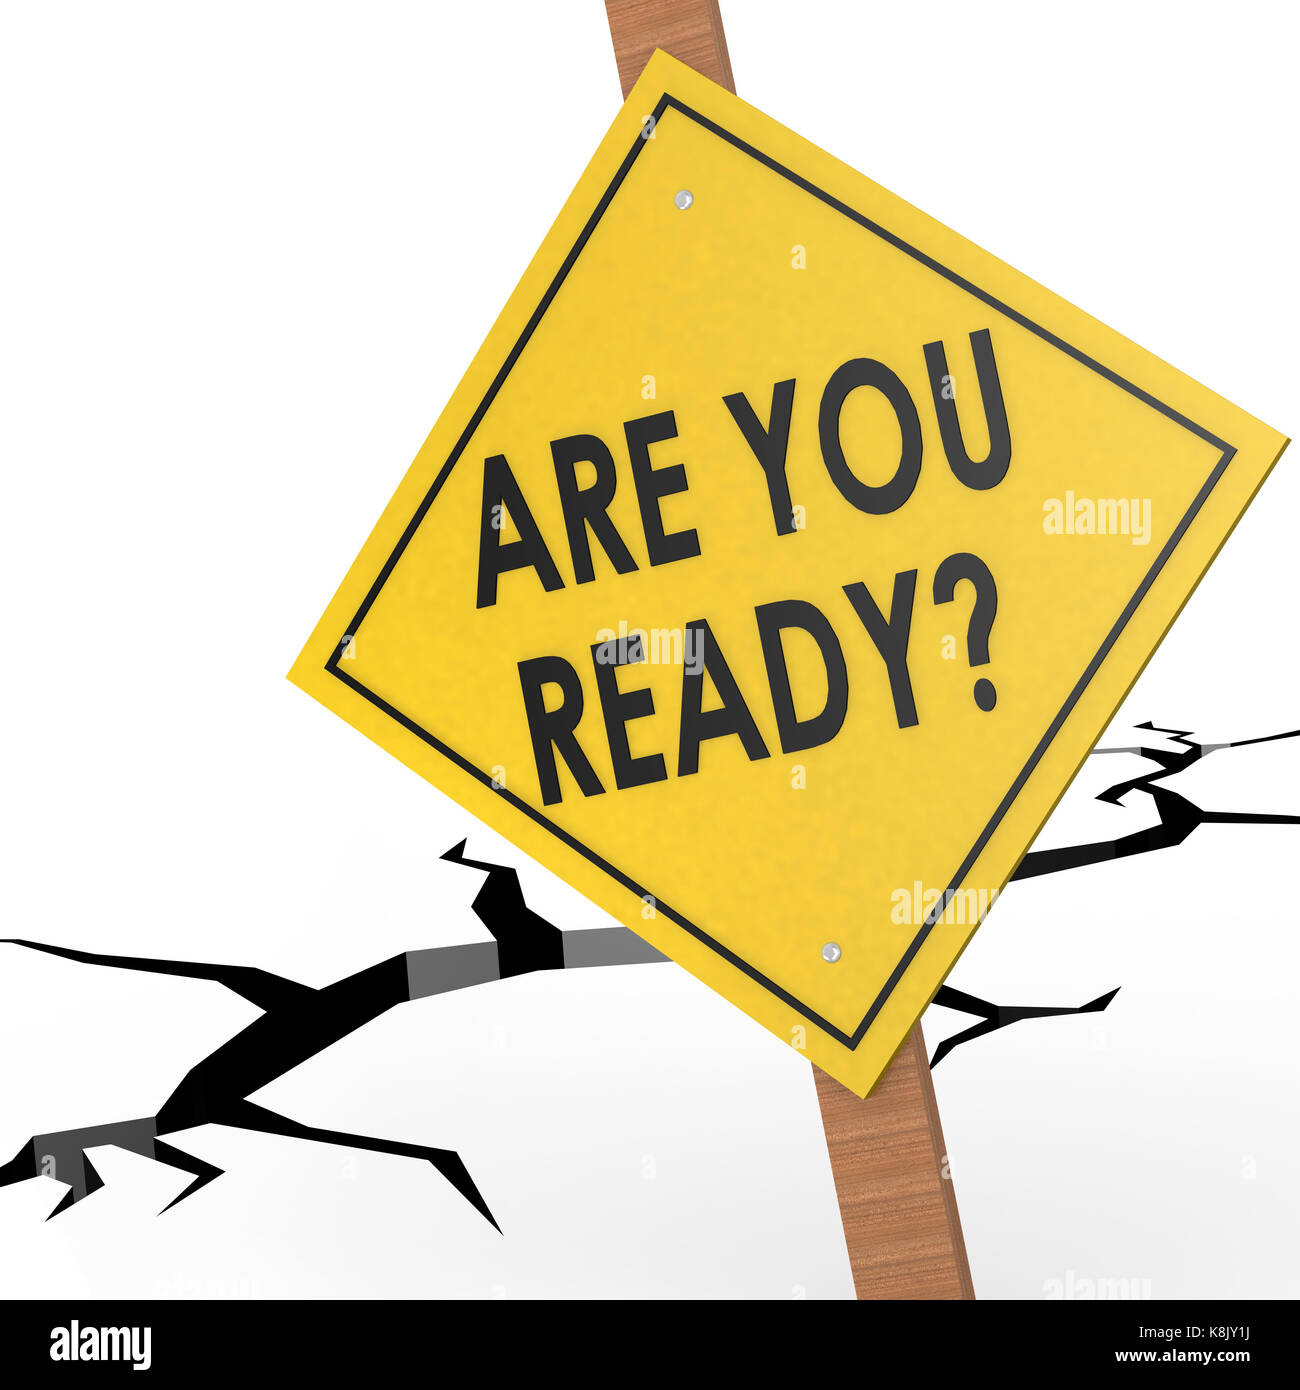 Are you ready sign board Stock Photo